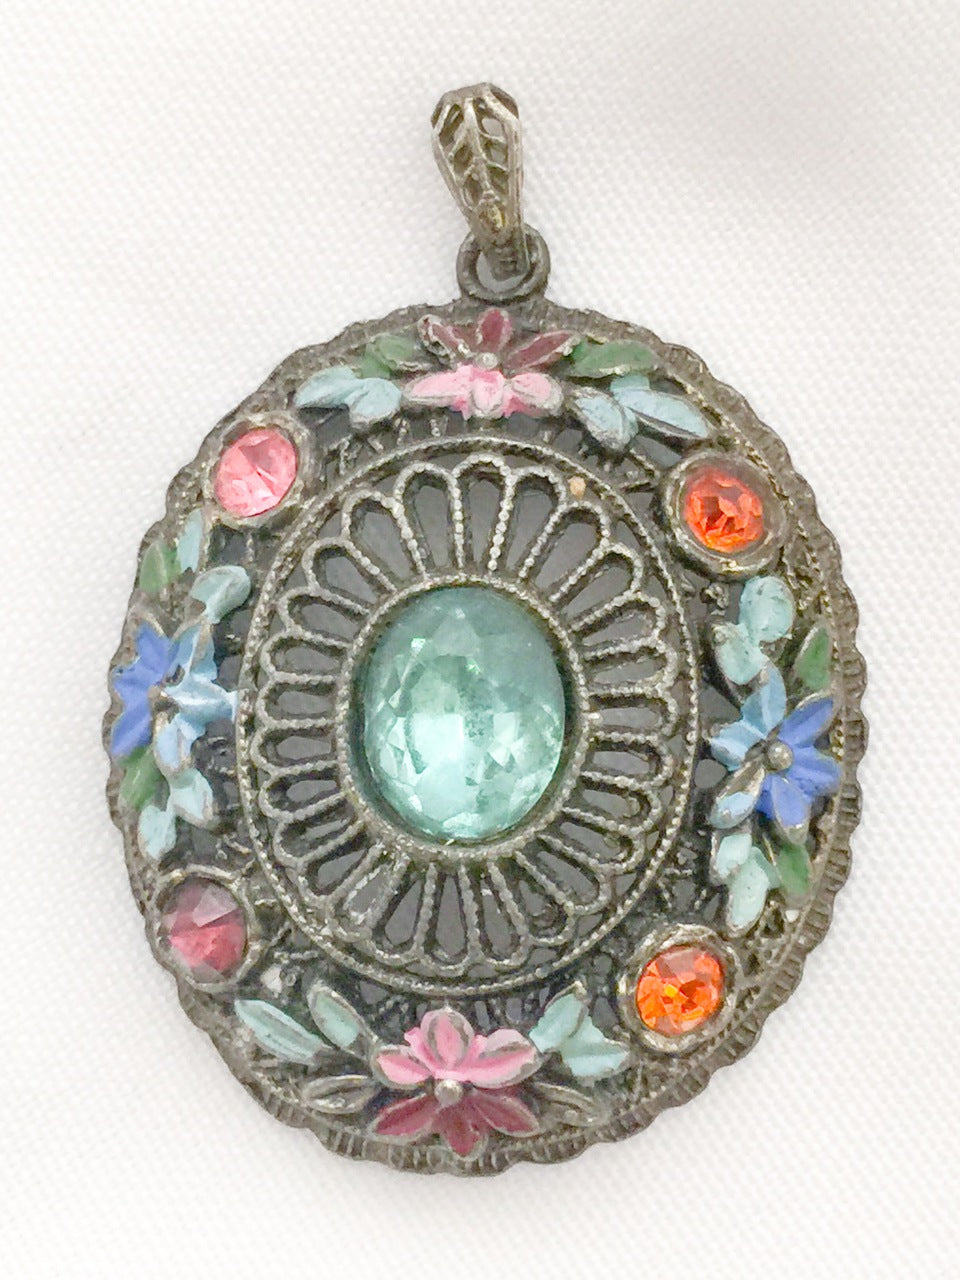 Vintage Flowers Crystal Pendant from Germany around the 1940's